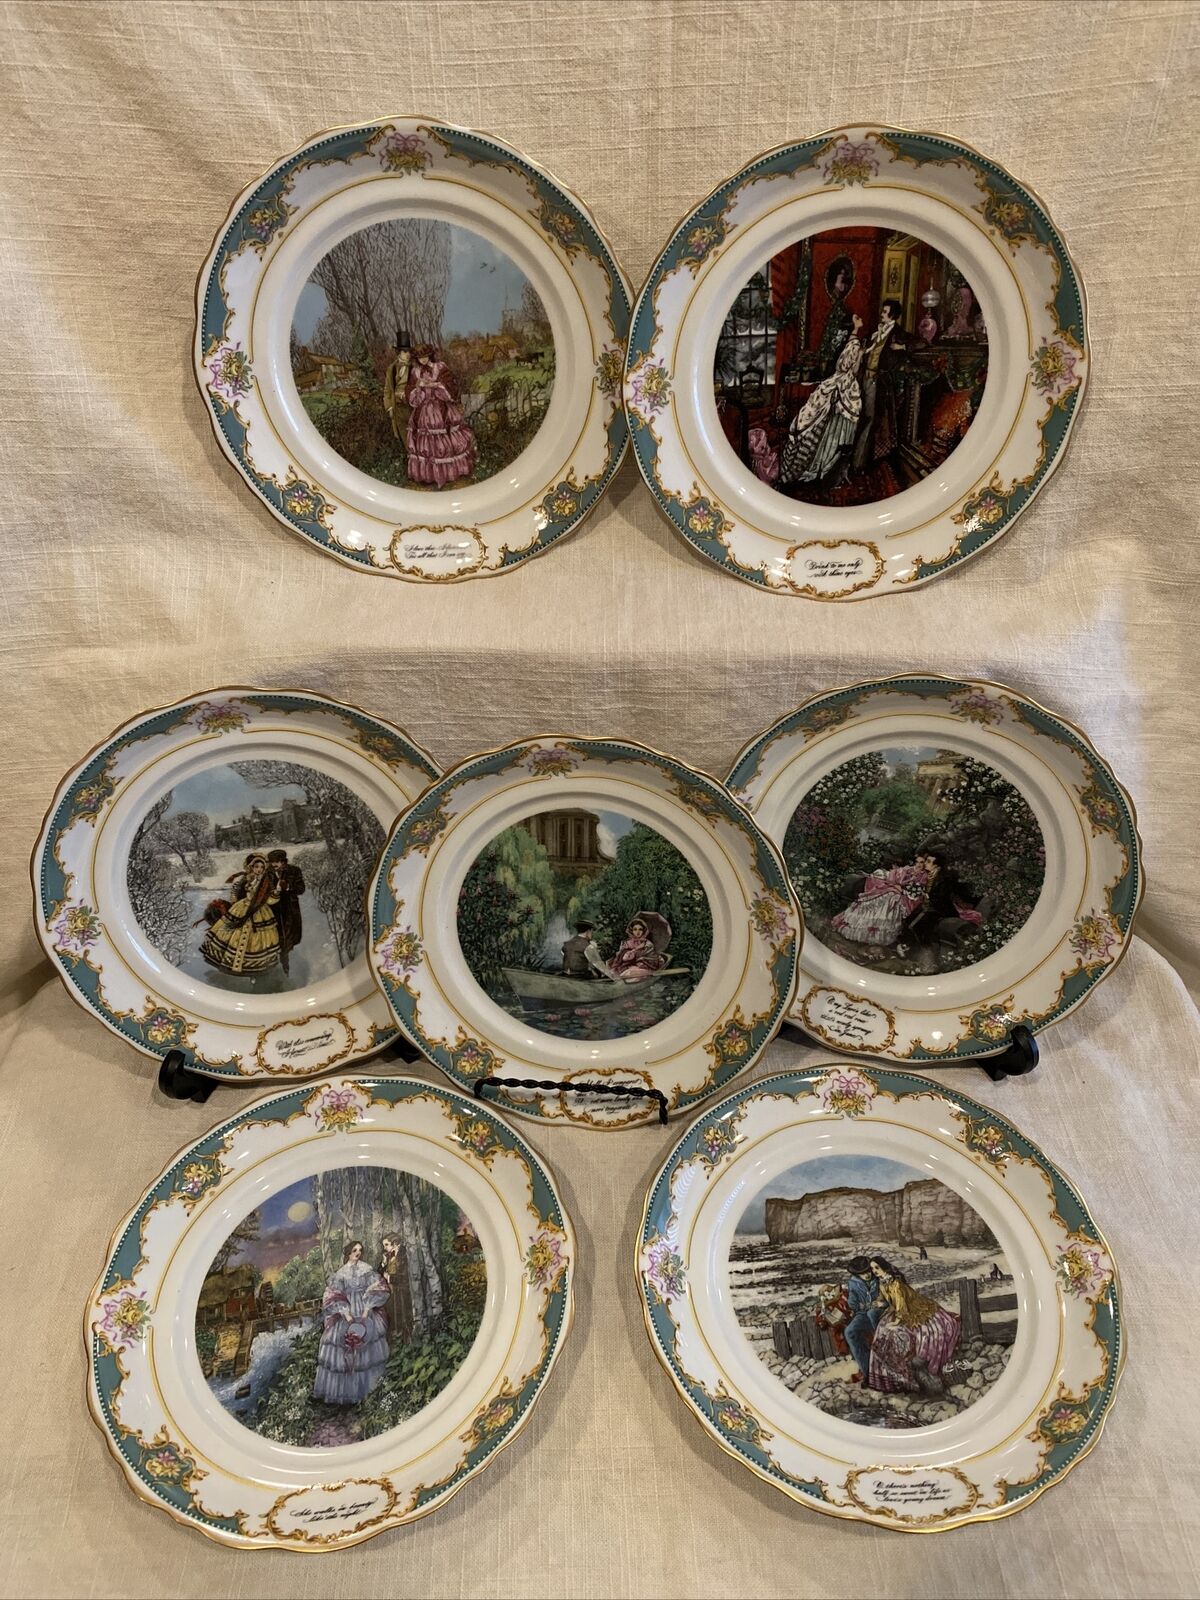 Lot of 7 Franklin Porcelain The Poetry Society 1982 Collector’s Plates Victorian